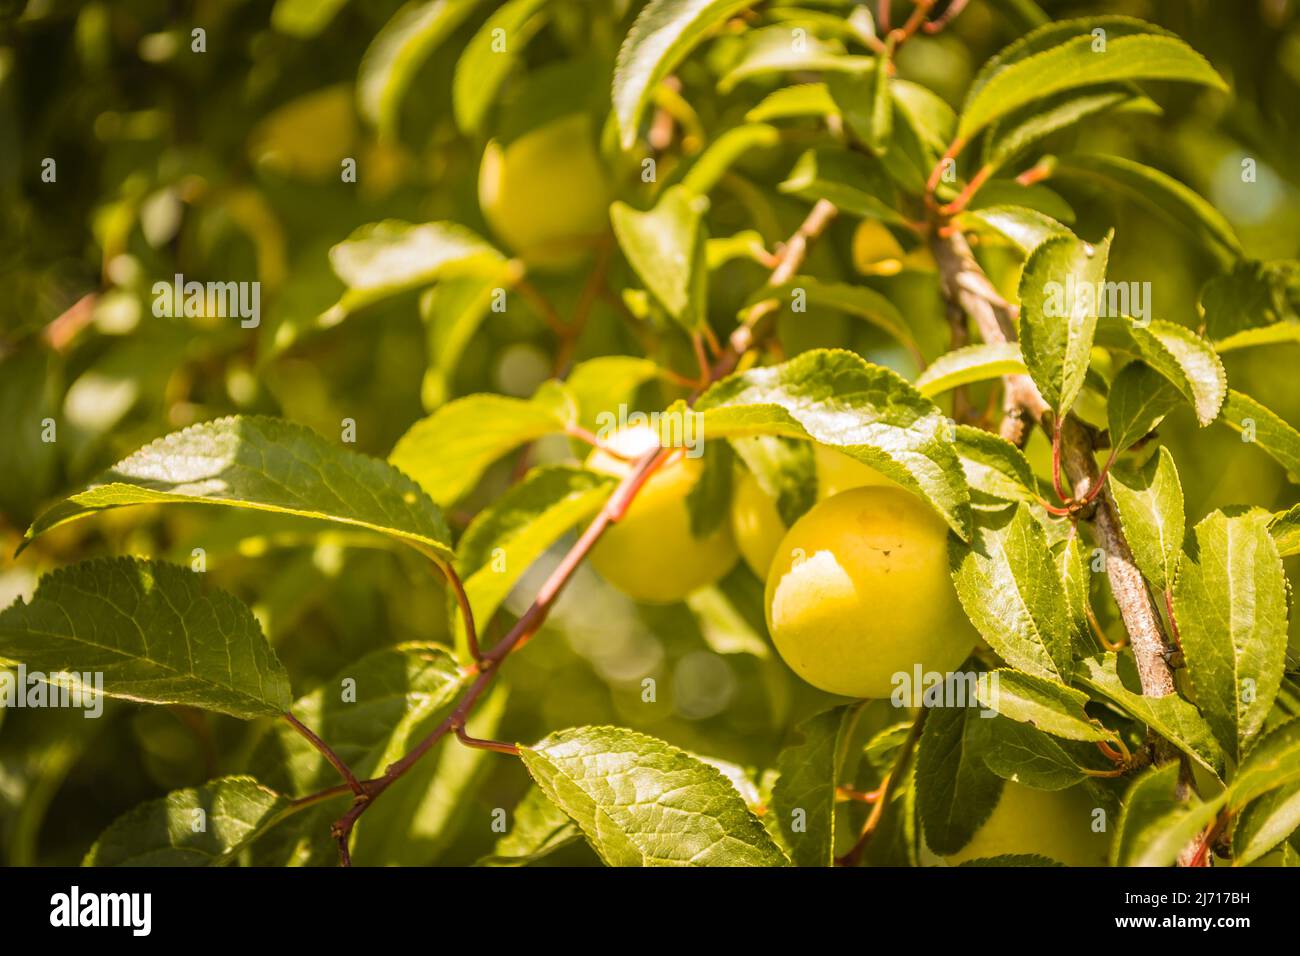 Beautiful fruits of yellow plums that grow in the canopy of green leaves, the plant grows in the garden in the sunlight, a photograph of nature. Stock Photo